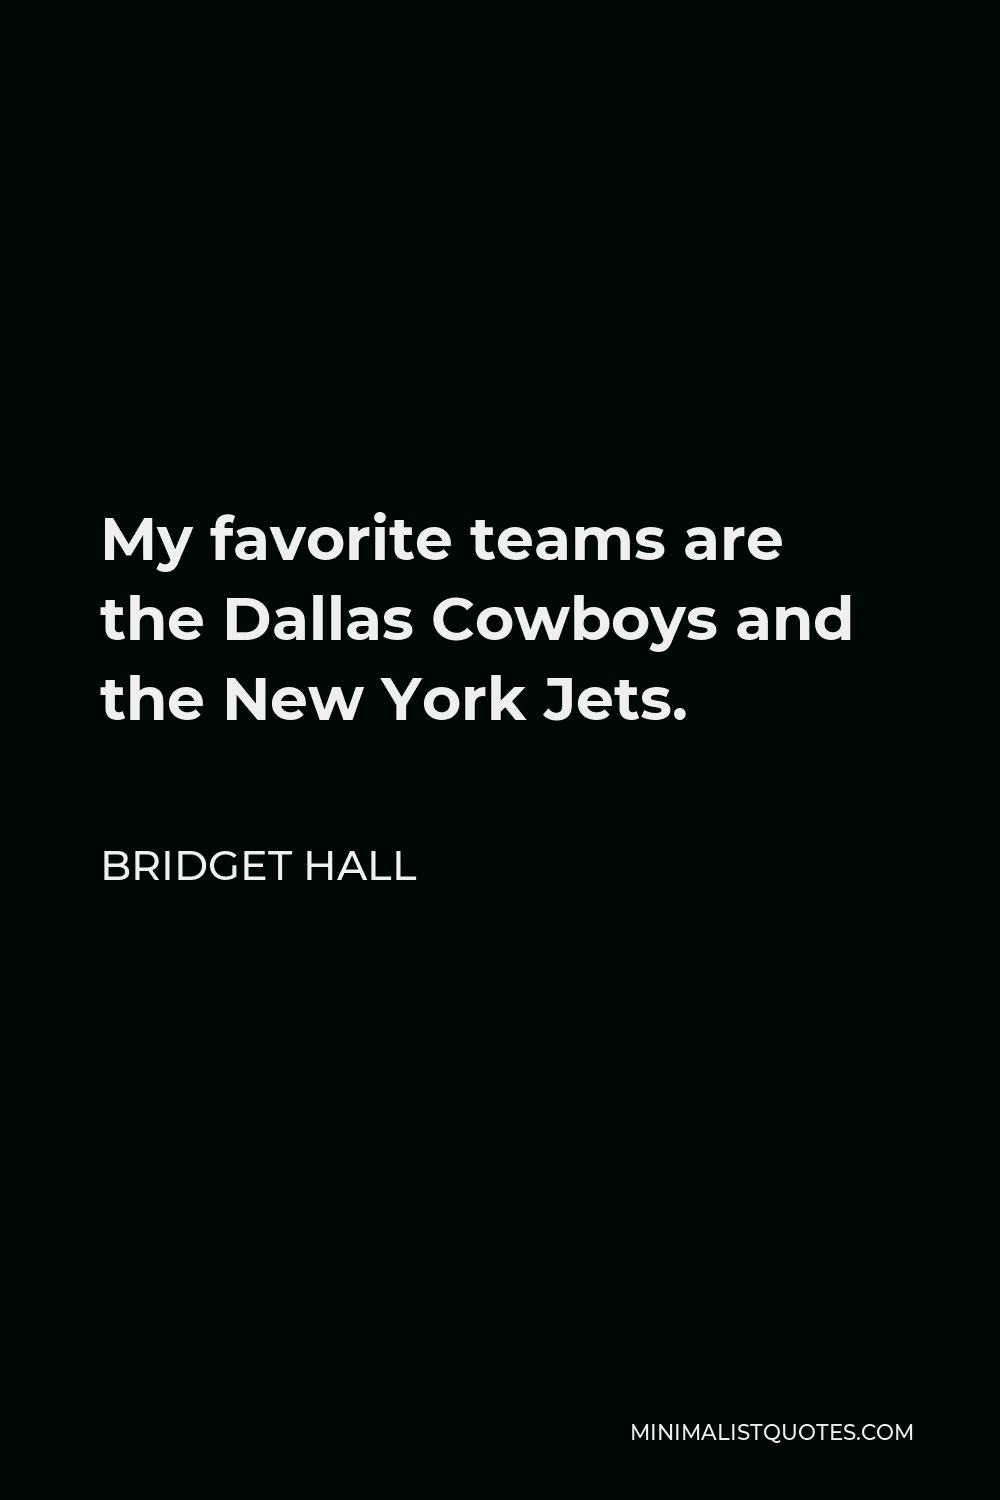 Bridget Hall Quote - My favorite teams are the Dallas Cowboys and the New York Jets.